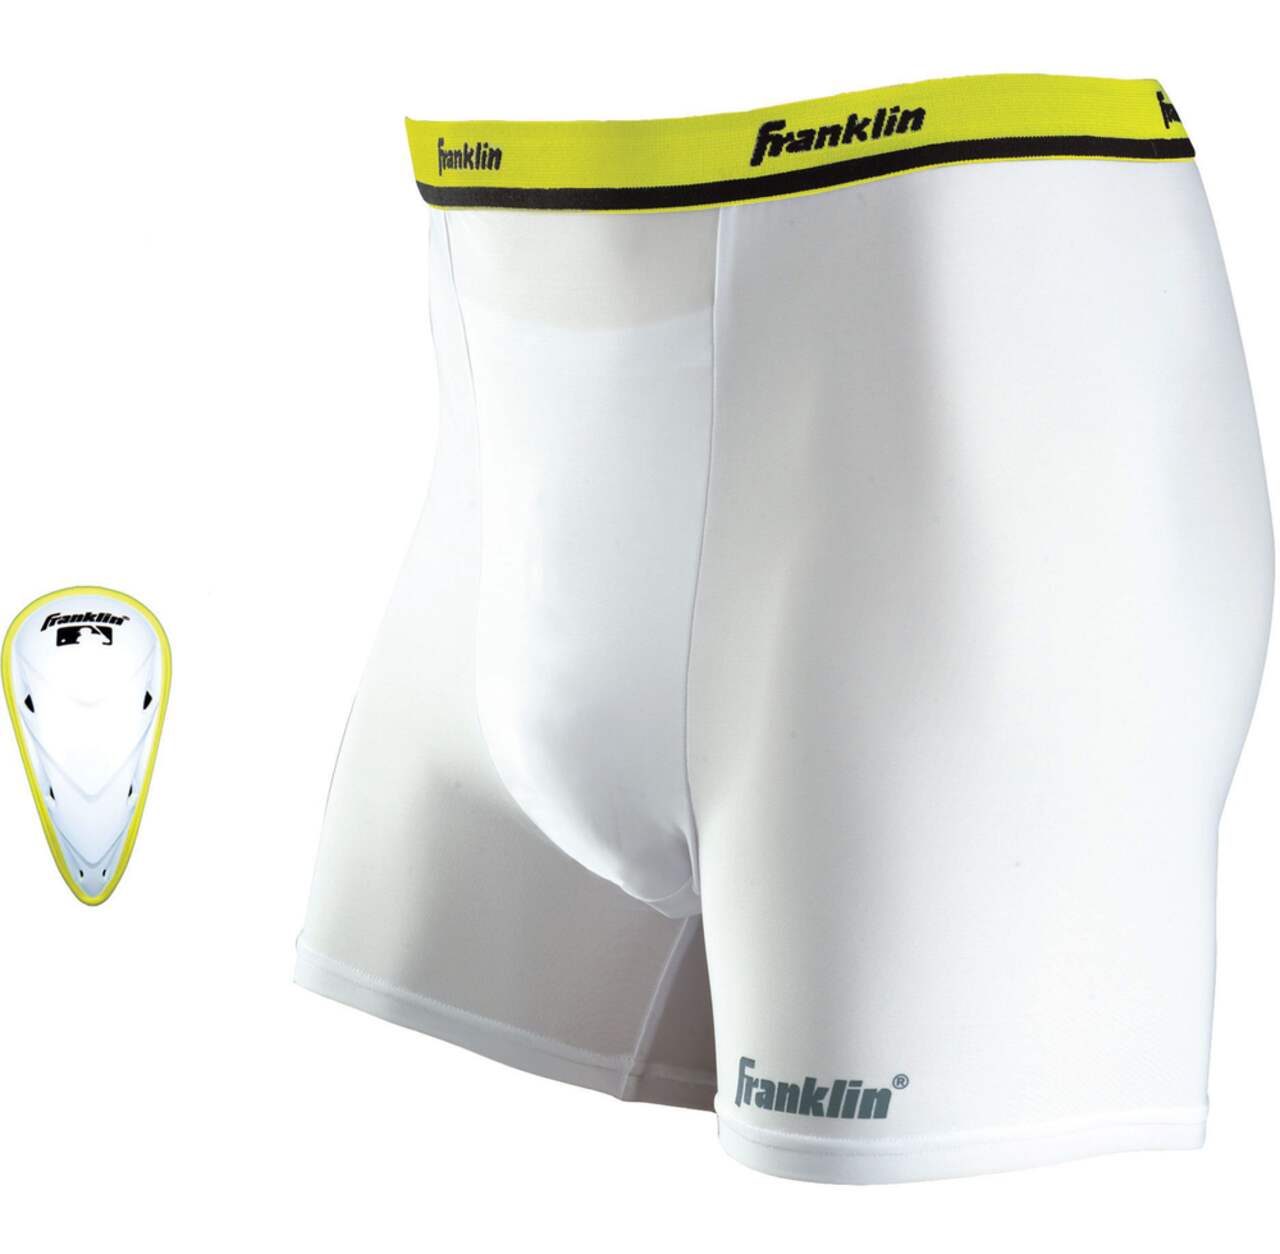 Compression Shorts With Cup Youth